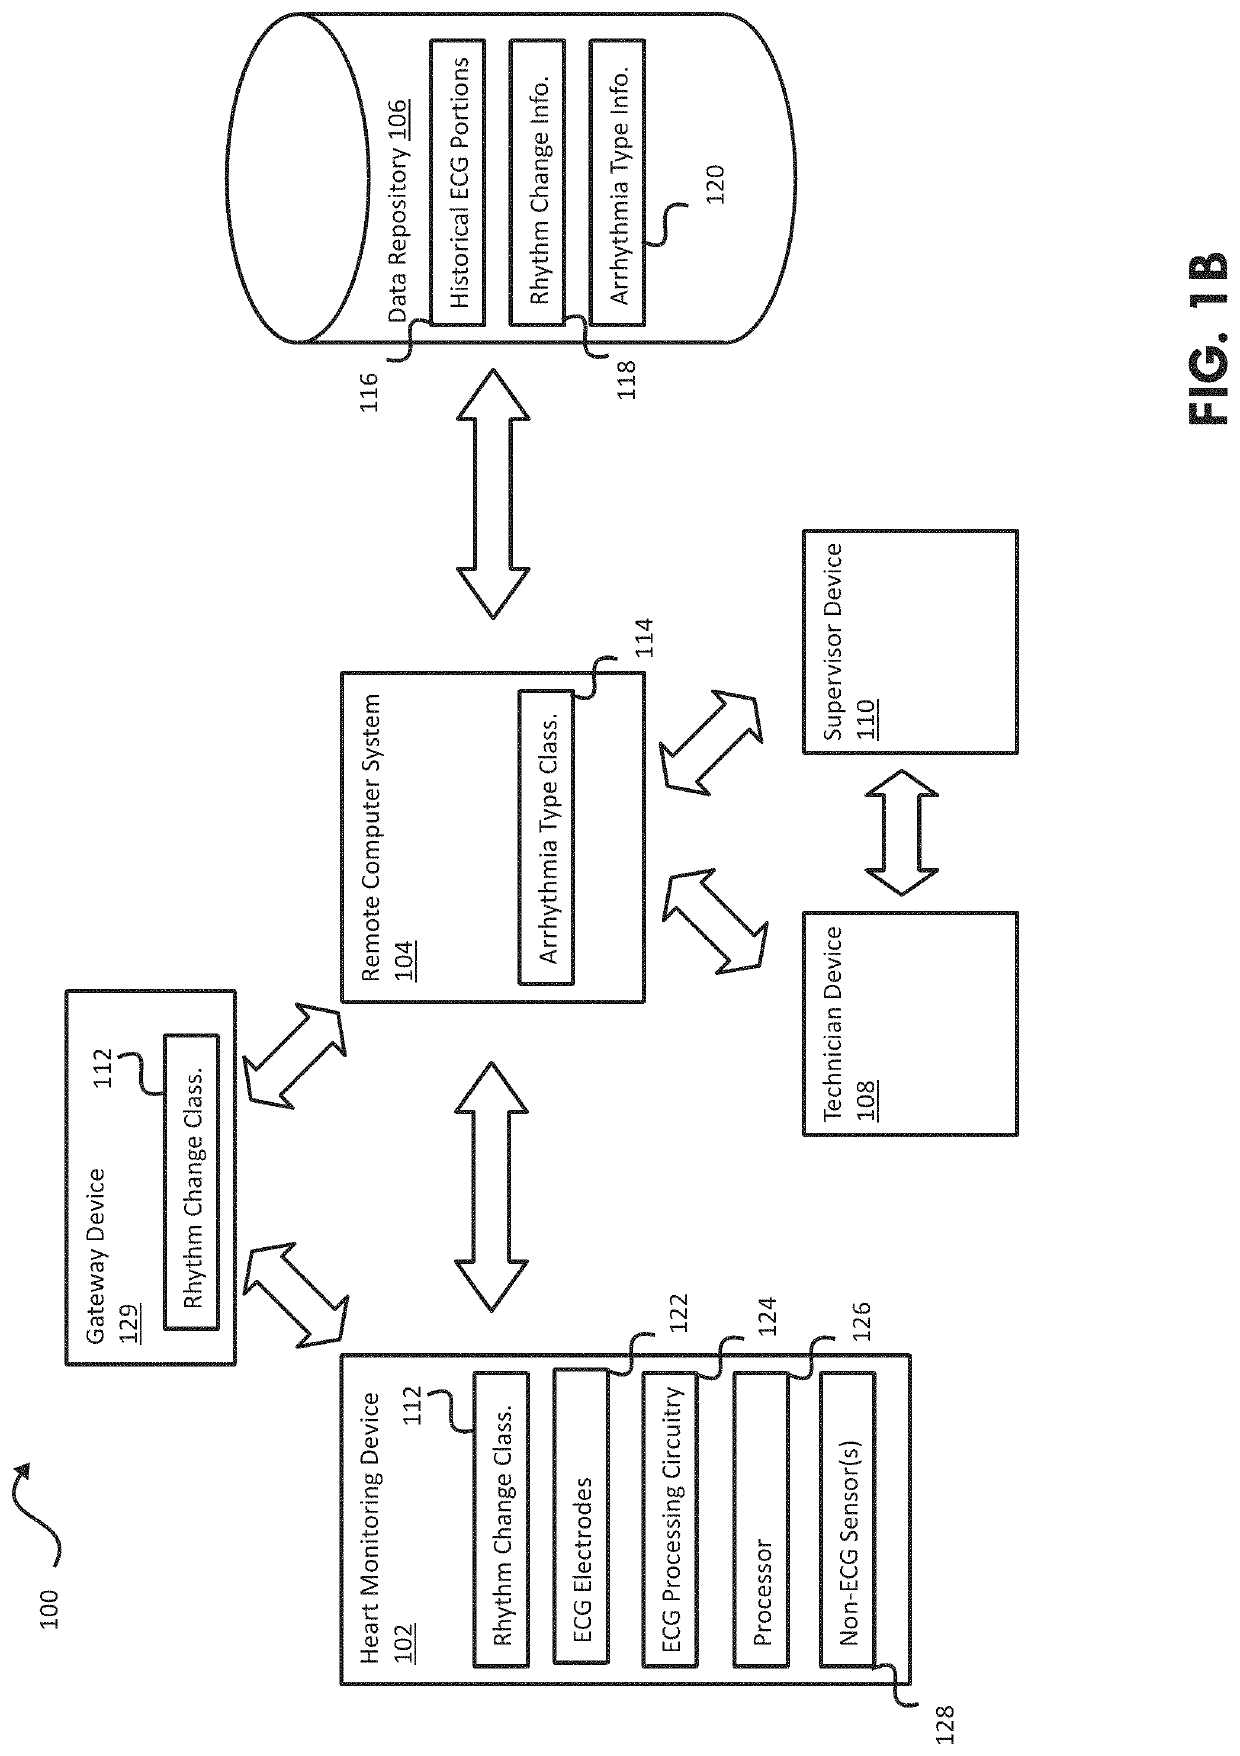 Systems, Devices, and Methods for Cardiac Diagnosis and/or Monitoring